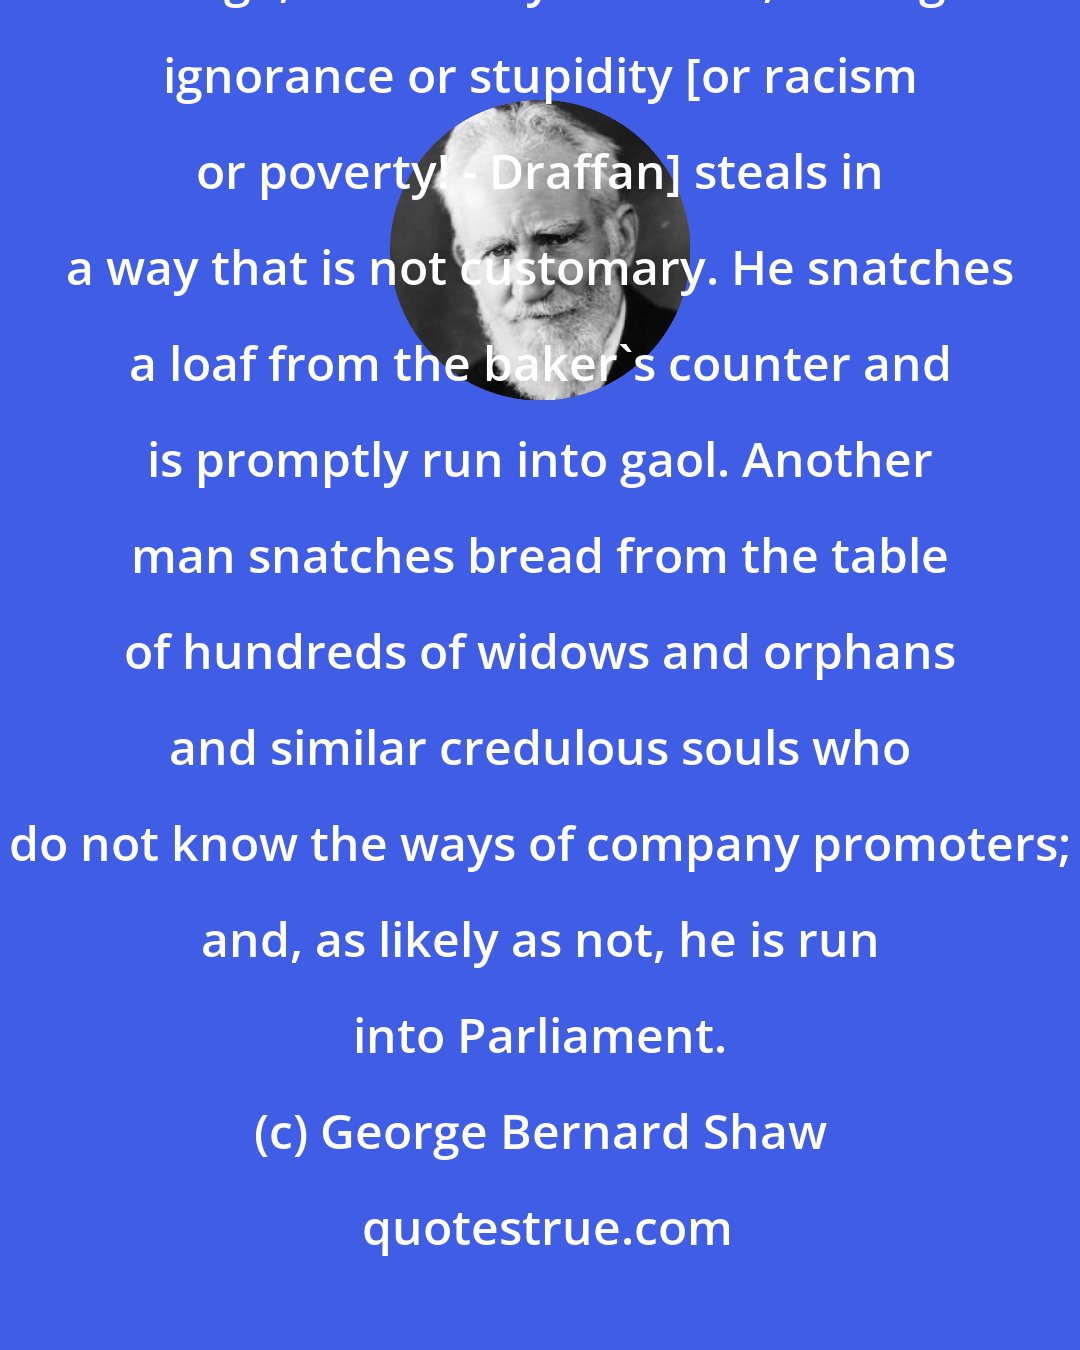 George Bernard Shaw: The thief who is in prison is not necessarily more dishonest than his fellows at large, but mostly one who, through ignorance or stupidity [or racism or poverty! - Draffan] steals in a way that is not customary. He snatches a loaf from the baker's counter and is promptly run into gaol. Another man snatches bread from the table of hundreds of widows and orphans and similar credulous souls who do not know the ways of company promoters; and, as likely as not, he is run into Parliament.